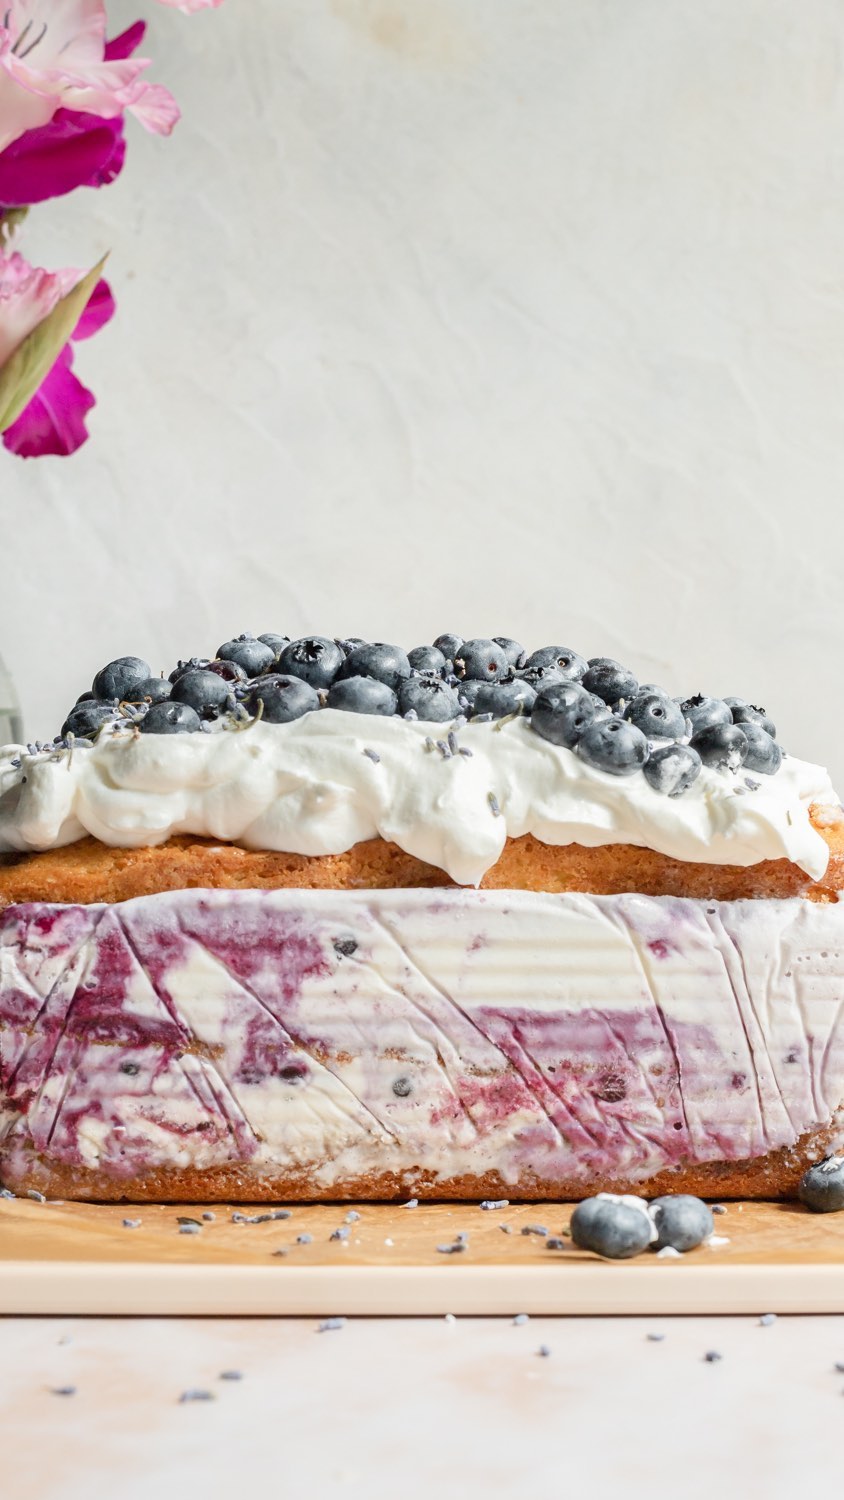 Lavender Pound Cake with Wild Blueberry Compote and Cream